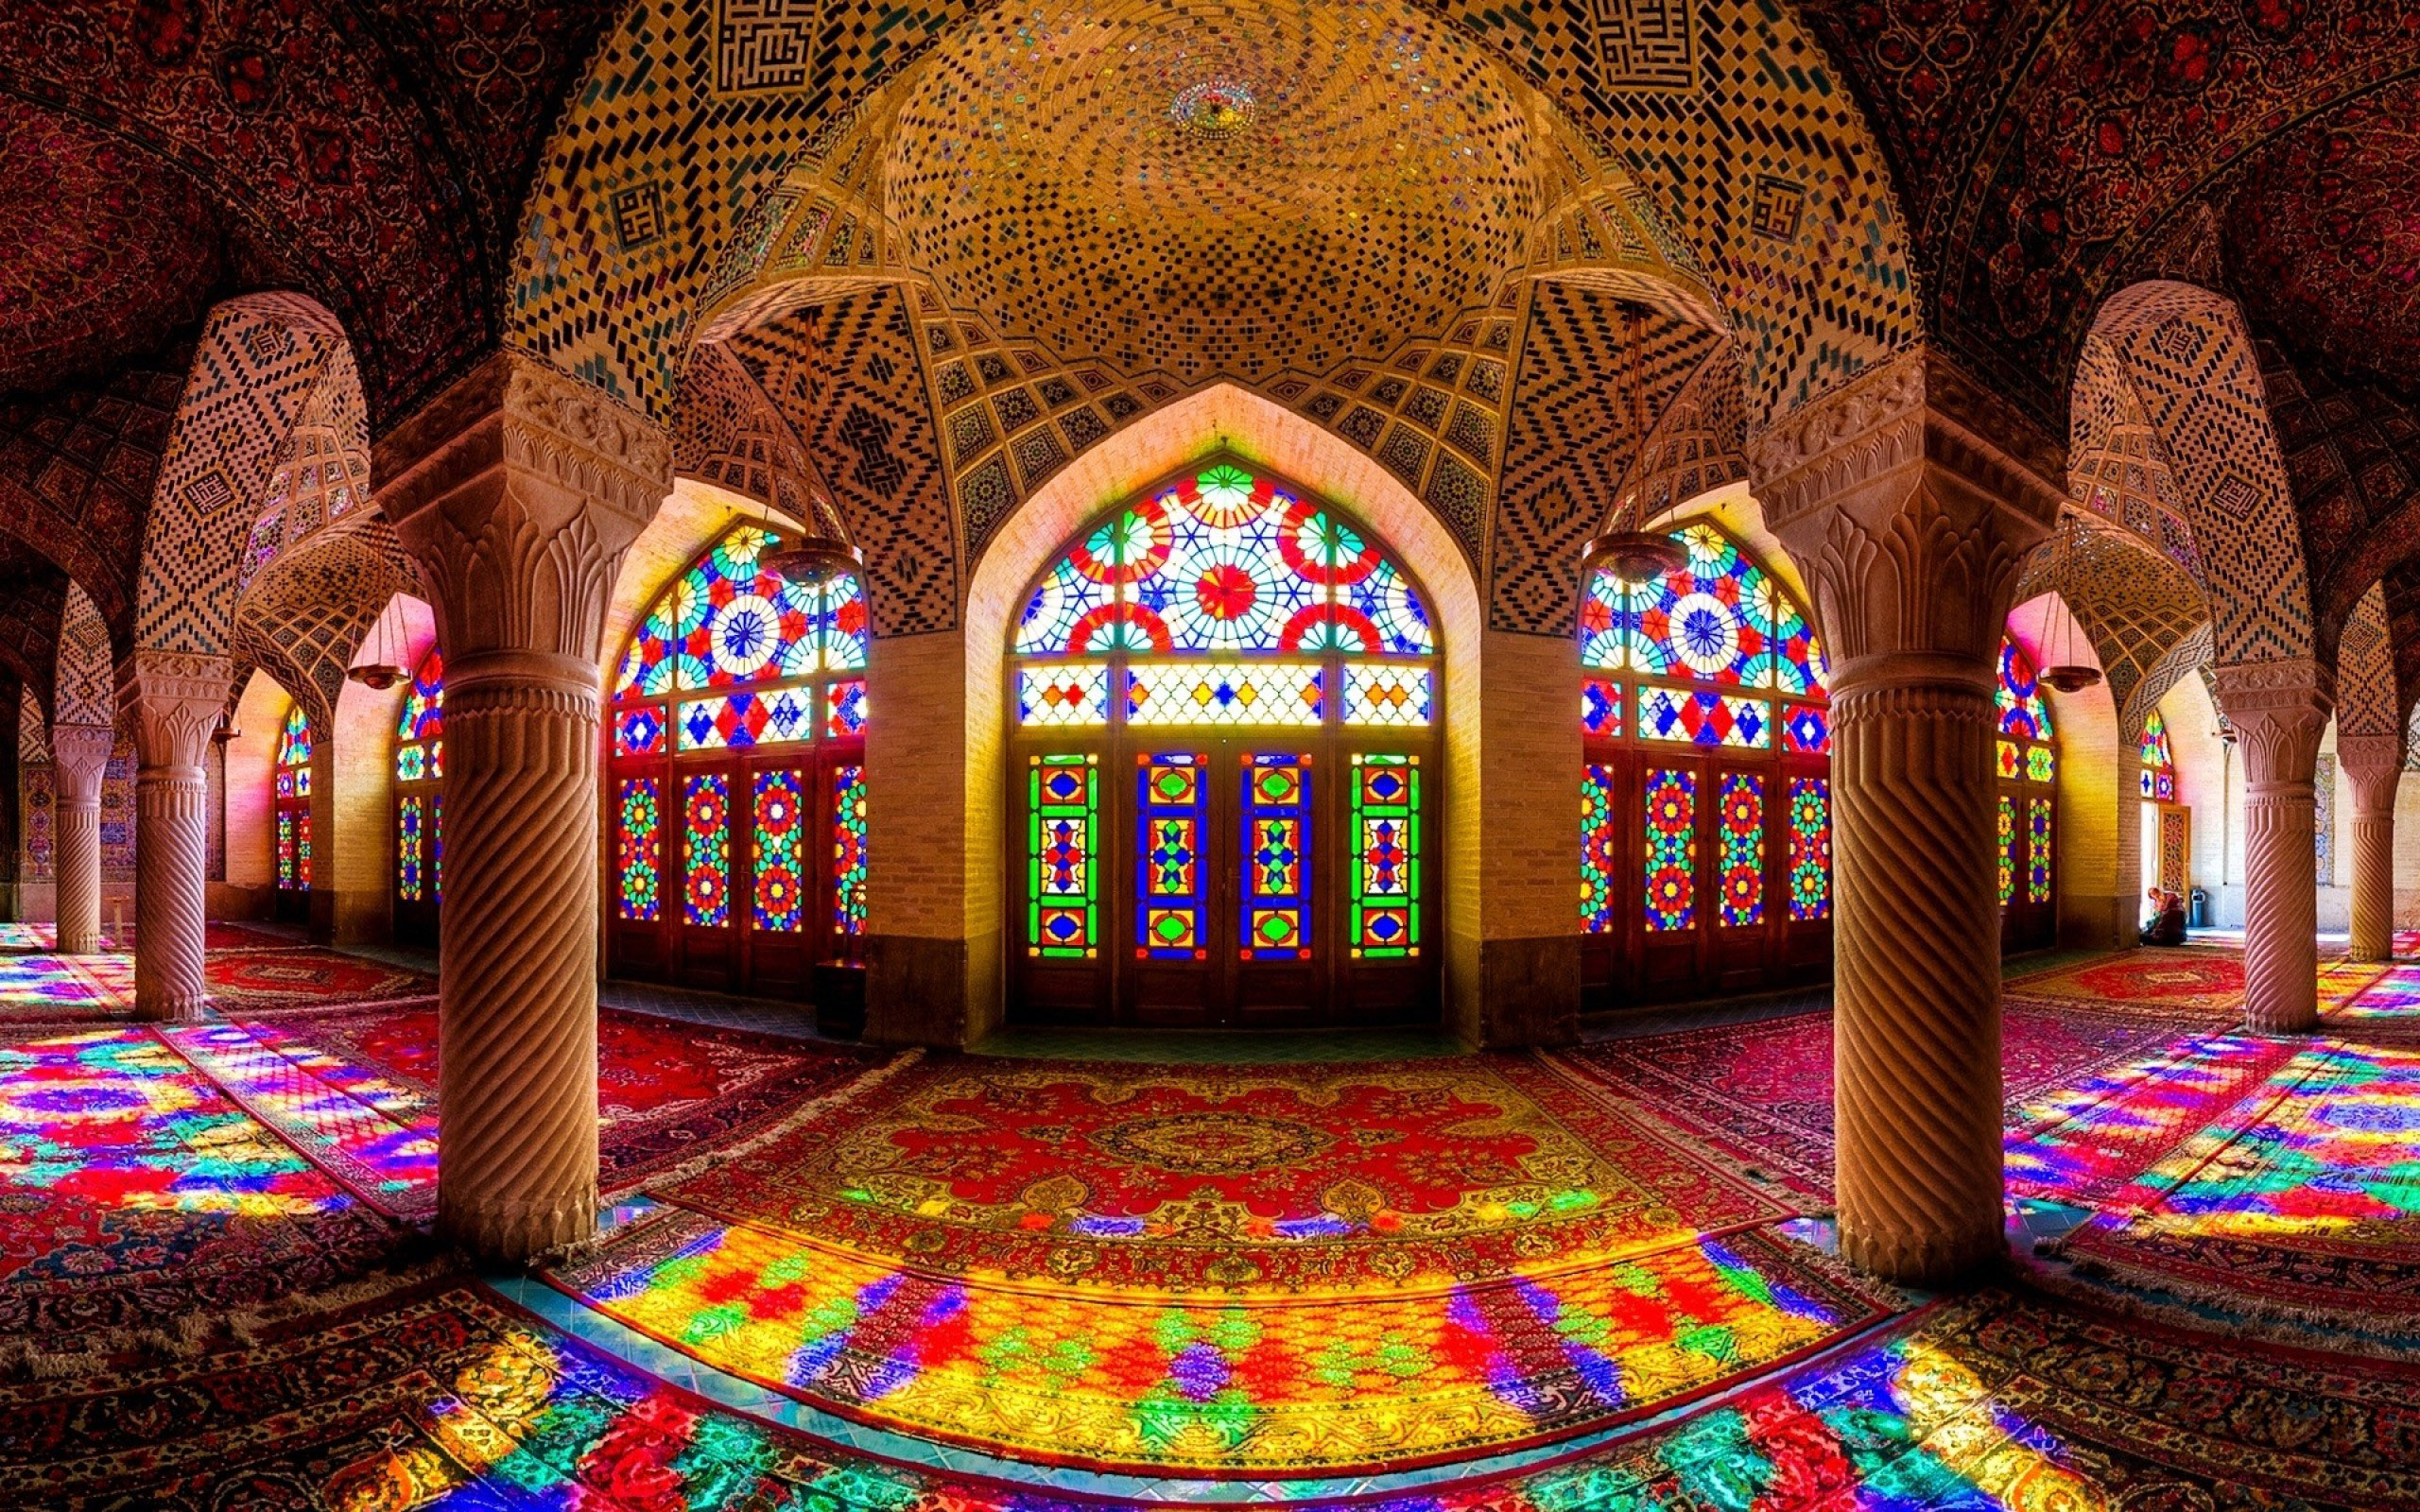 Nasir ol molk Mosque3 - What Are the TOP 20 Tourist Destinations in Iran?